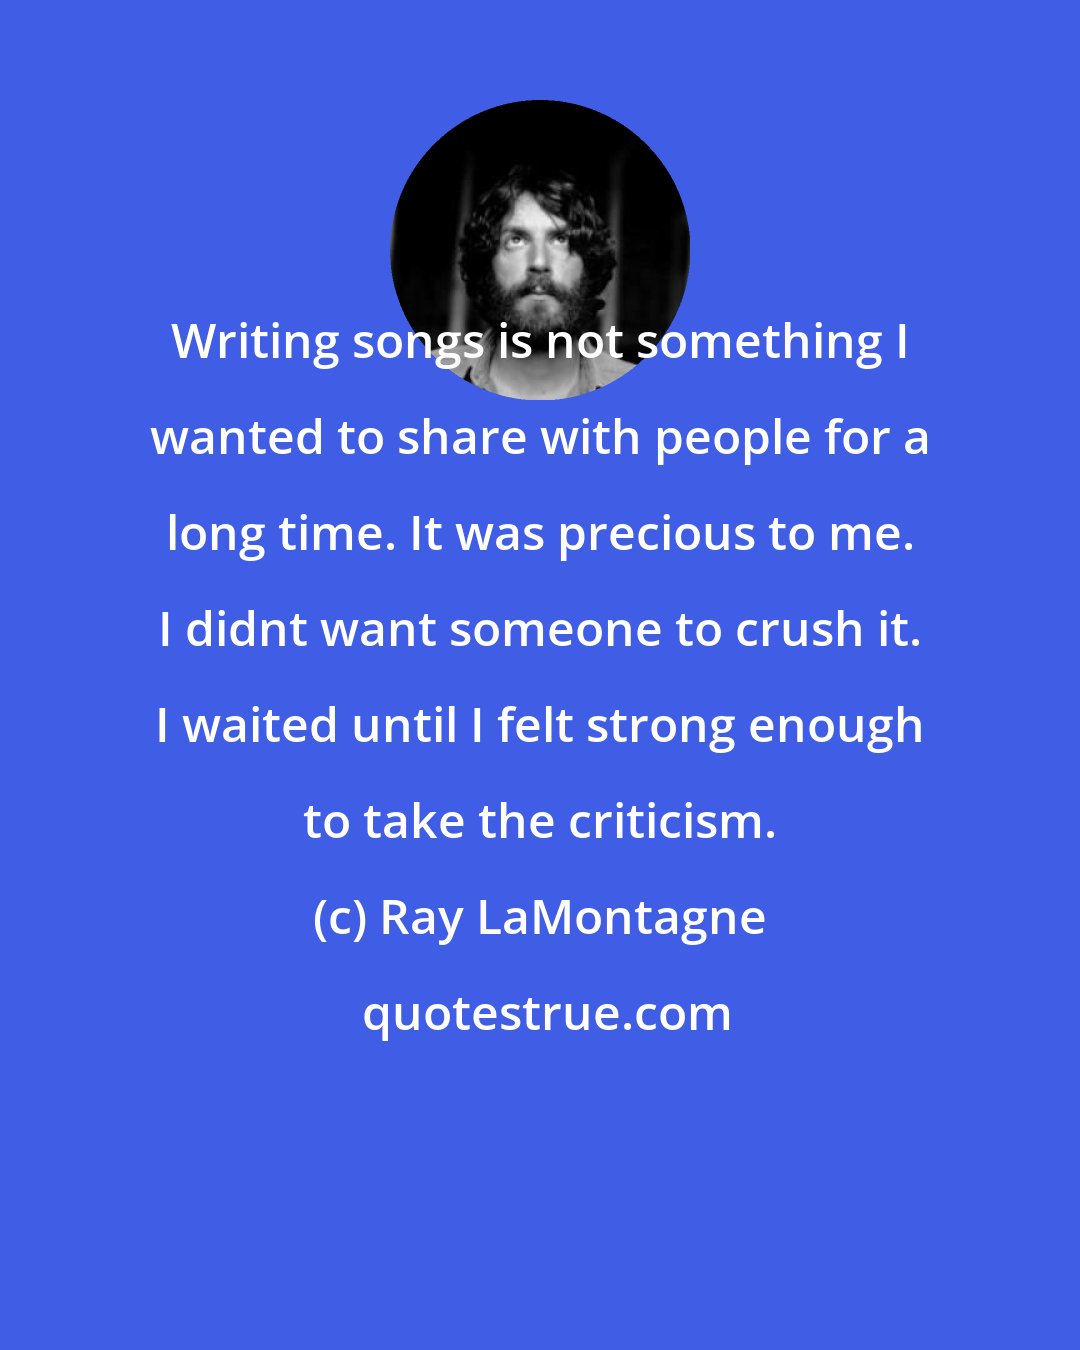 Ray LaMontagne: Writing songs is not something I wanted to share with people for a long time. It was precious to me. I didnt want someone to crush it. I waited until I felt strong enough to take the criticism.